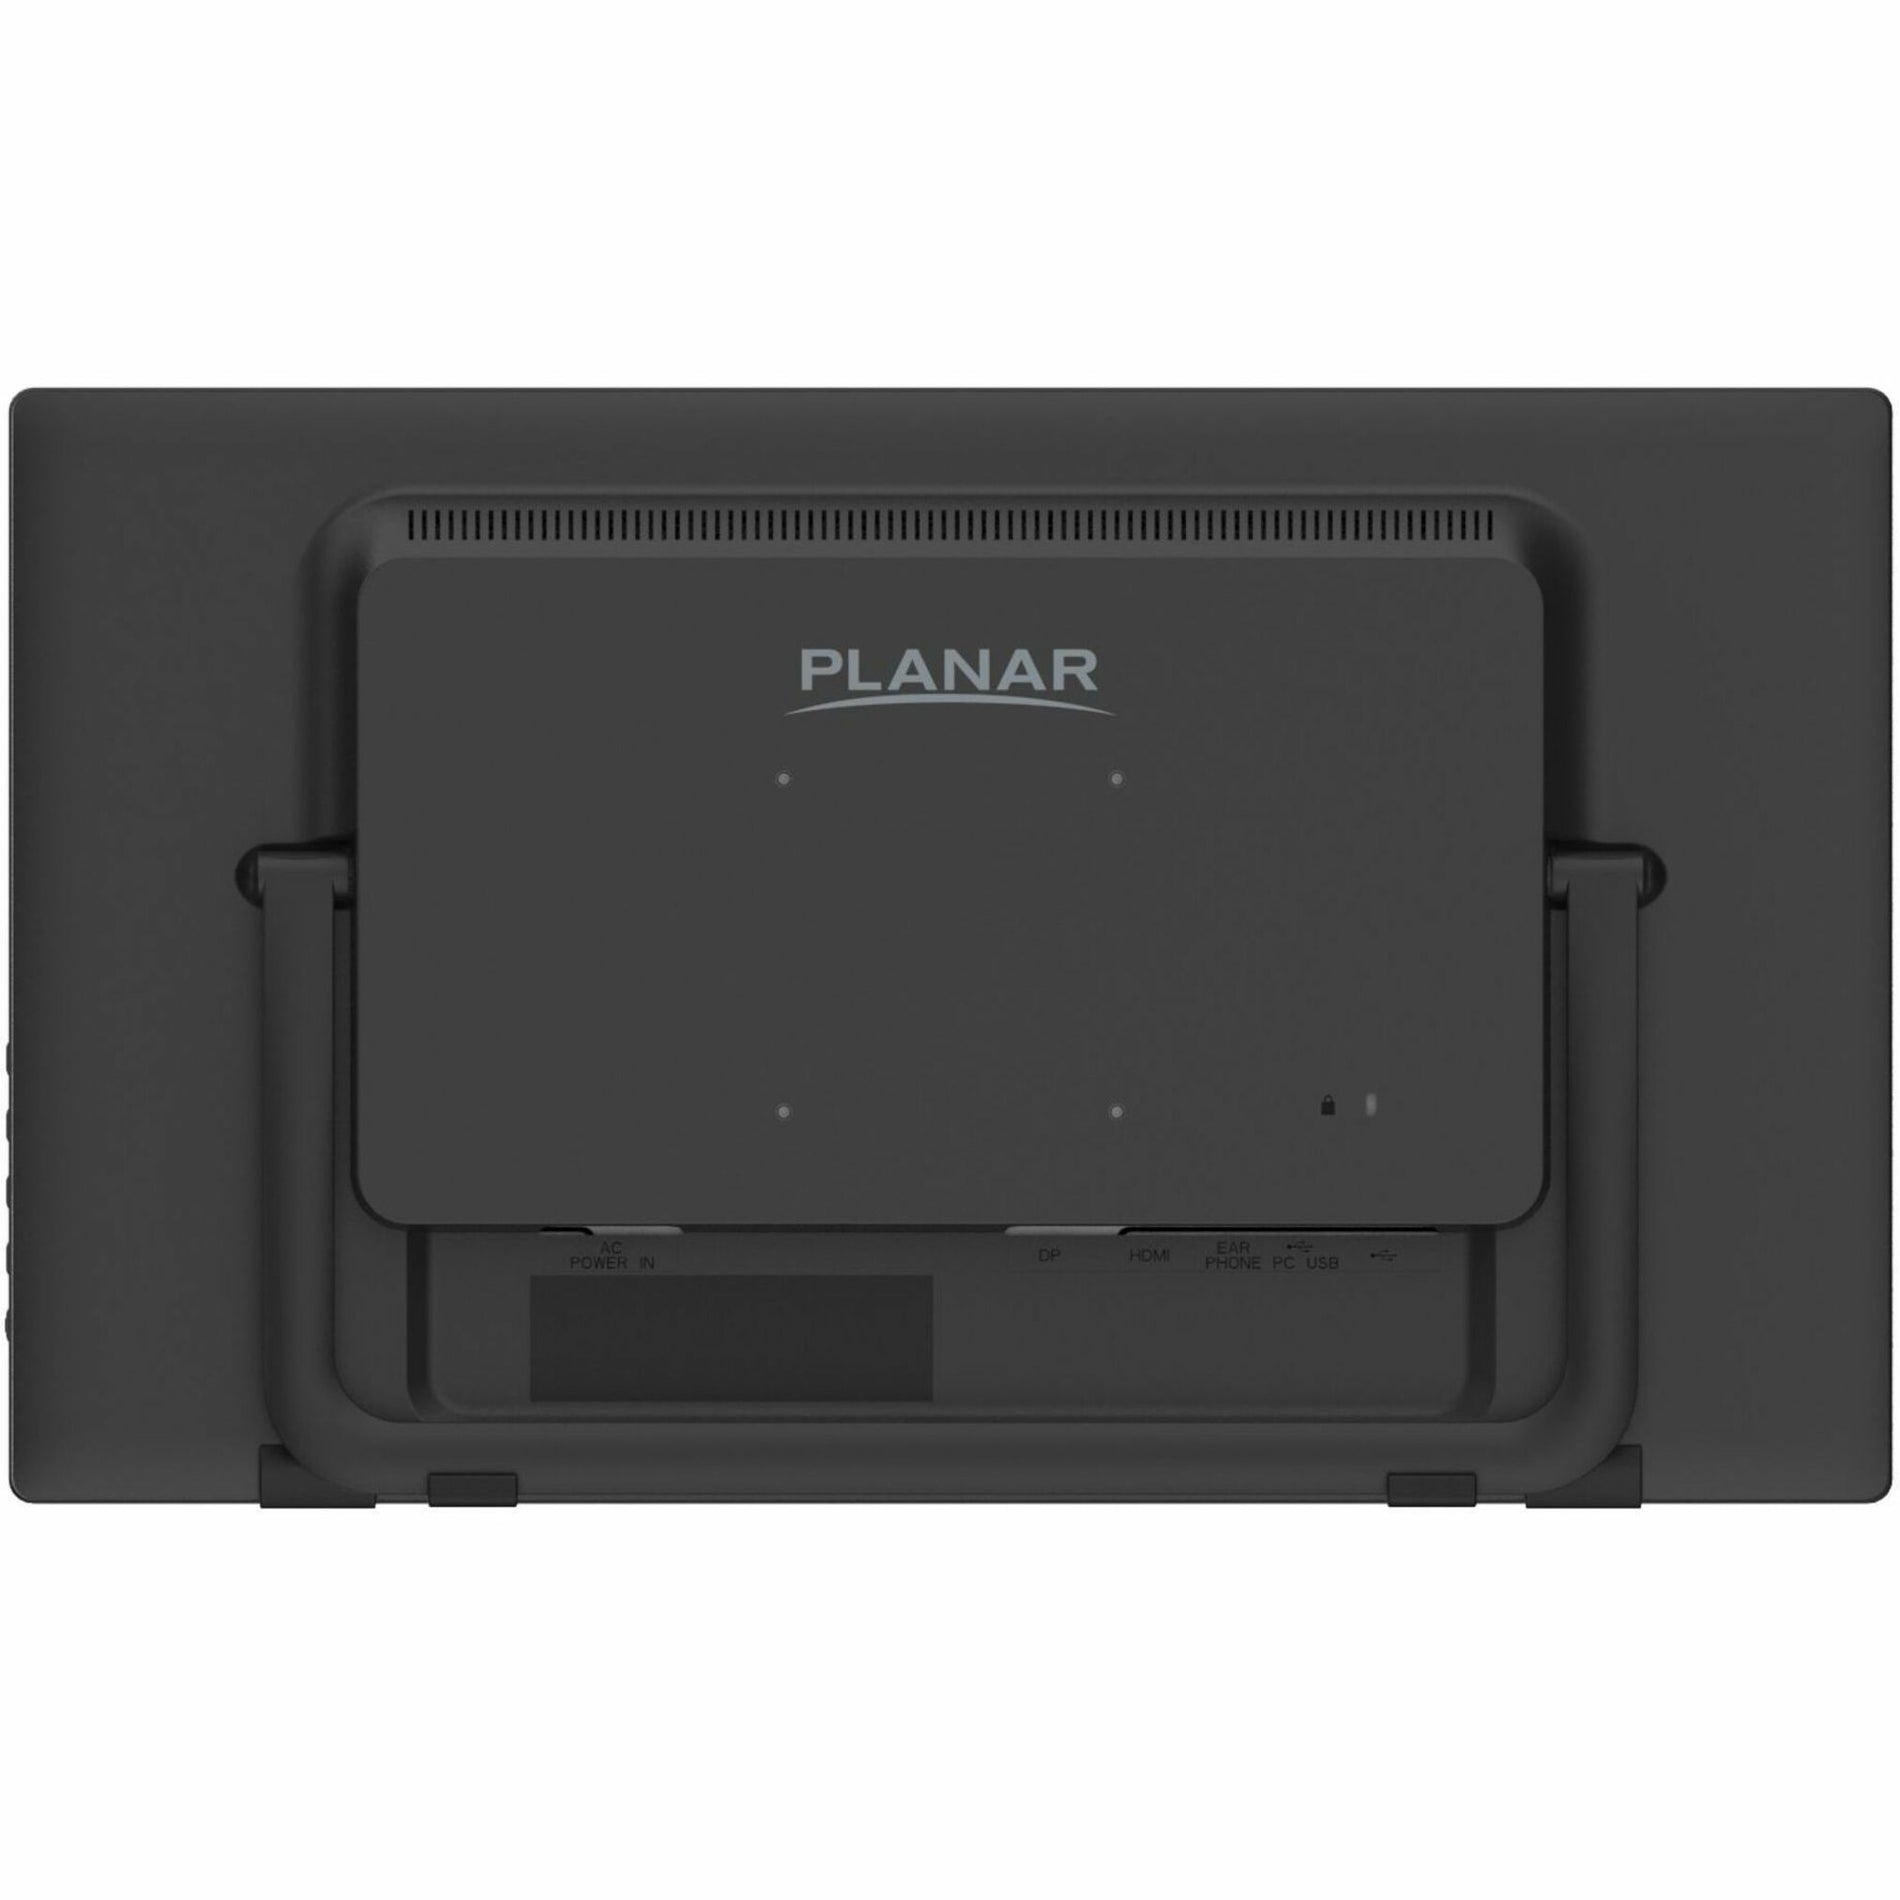 Planar 998-3328-00 Helium PCT2495 24" Touch Screen Monitor, Full HD, 10-Point Multi-Touch, Built-in Webcam, USB Hub